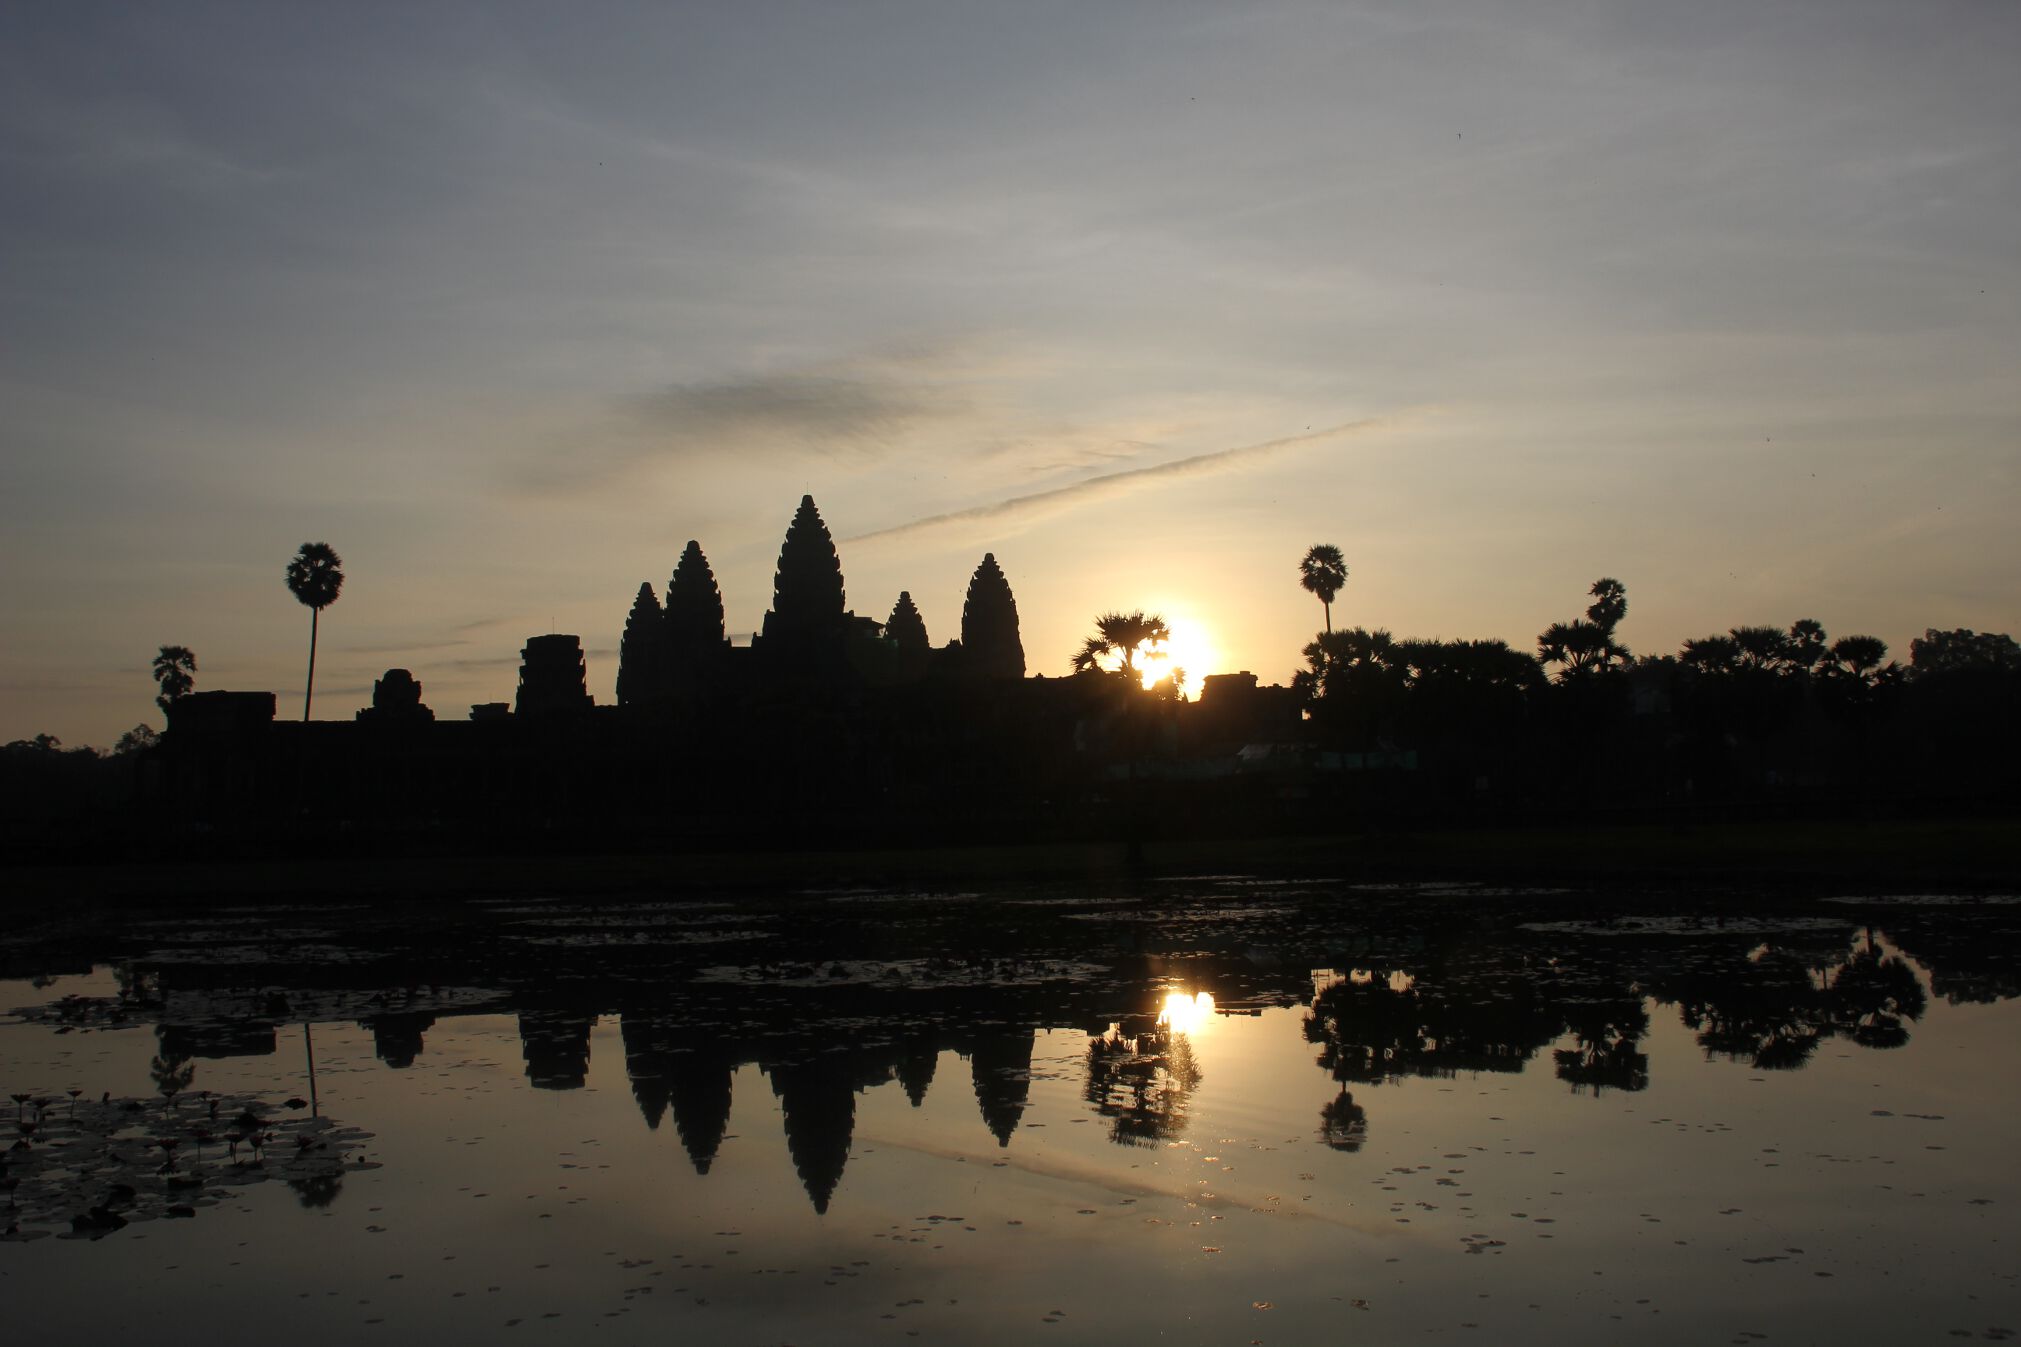 The sun rises behind Angkor Wat early in the morning in Angkor, Cambodia.